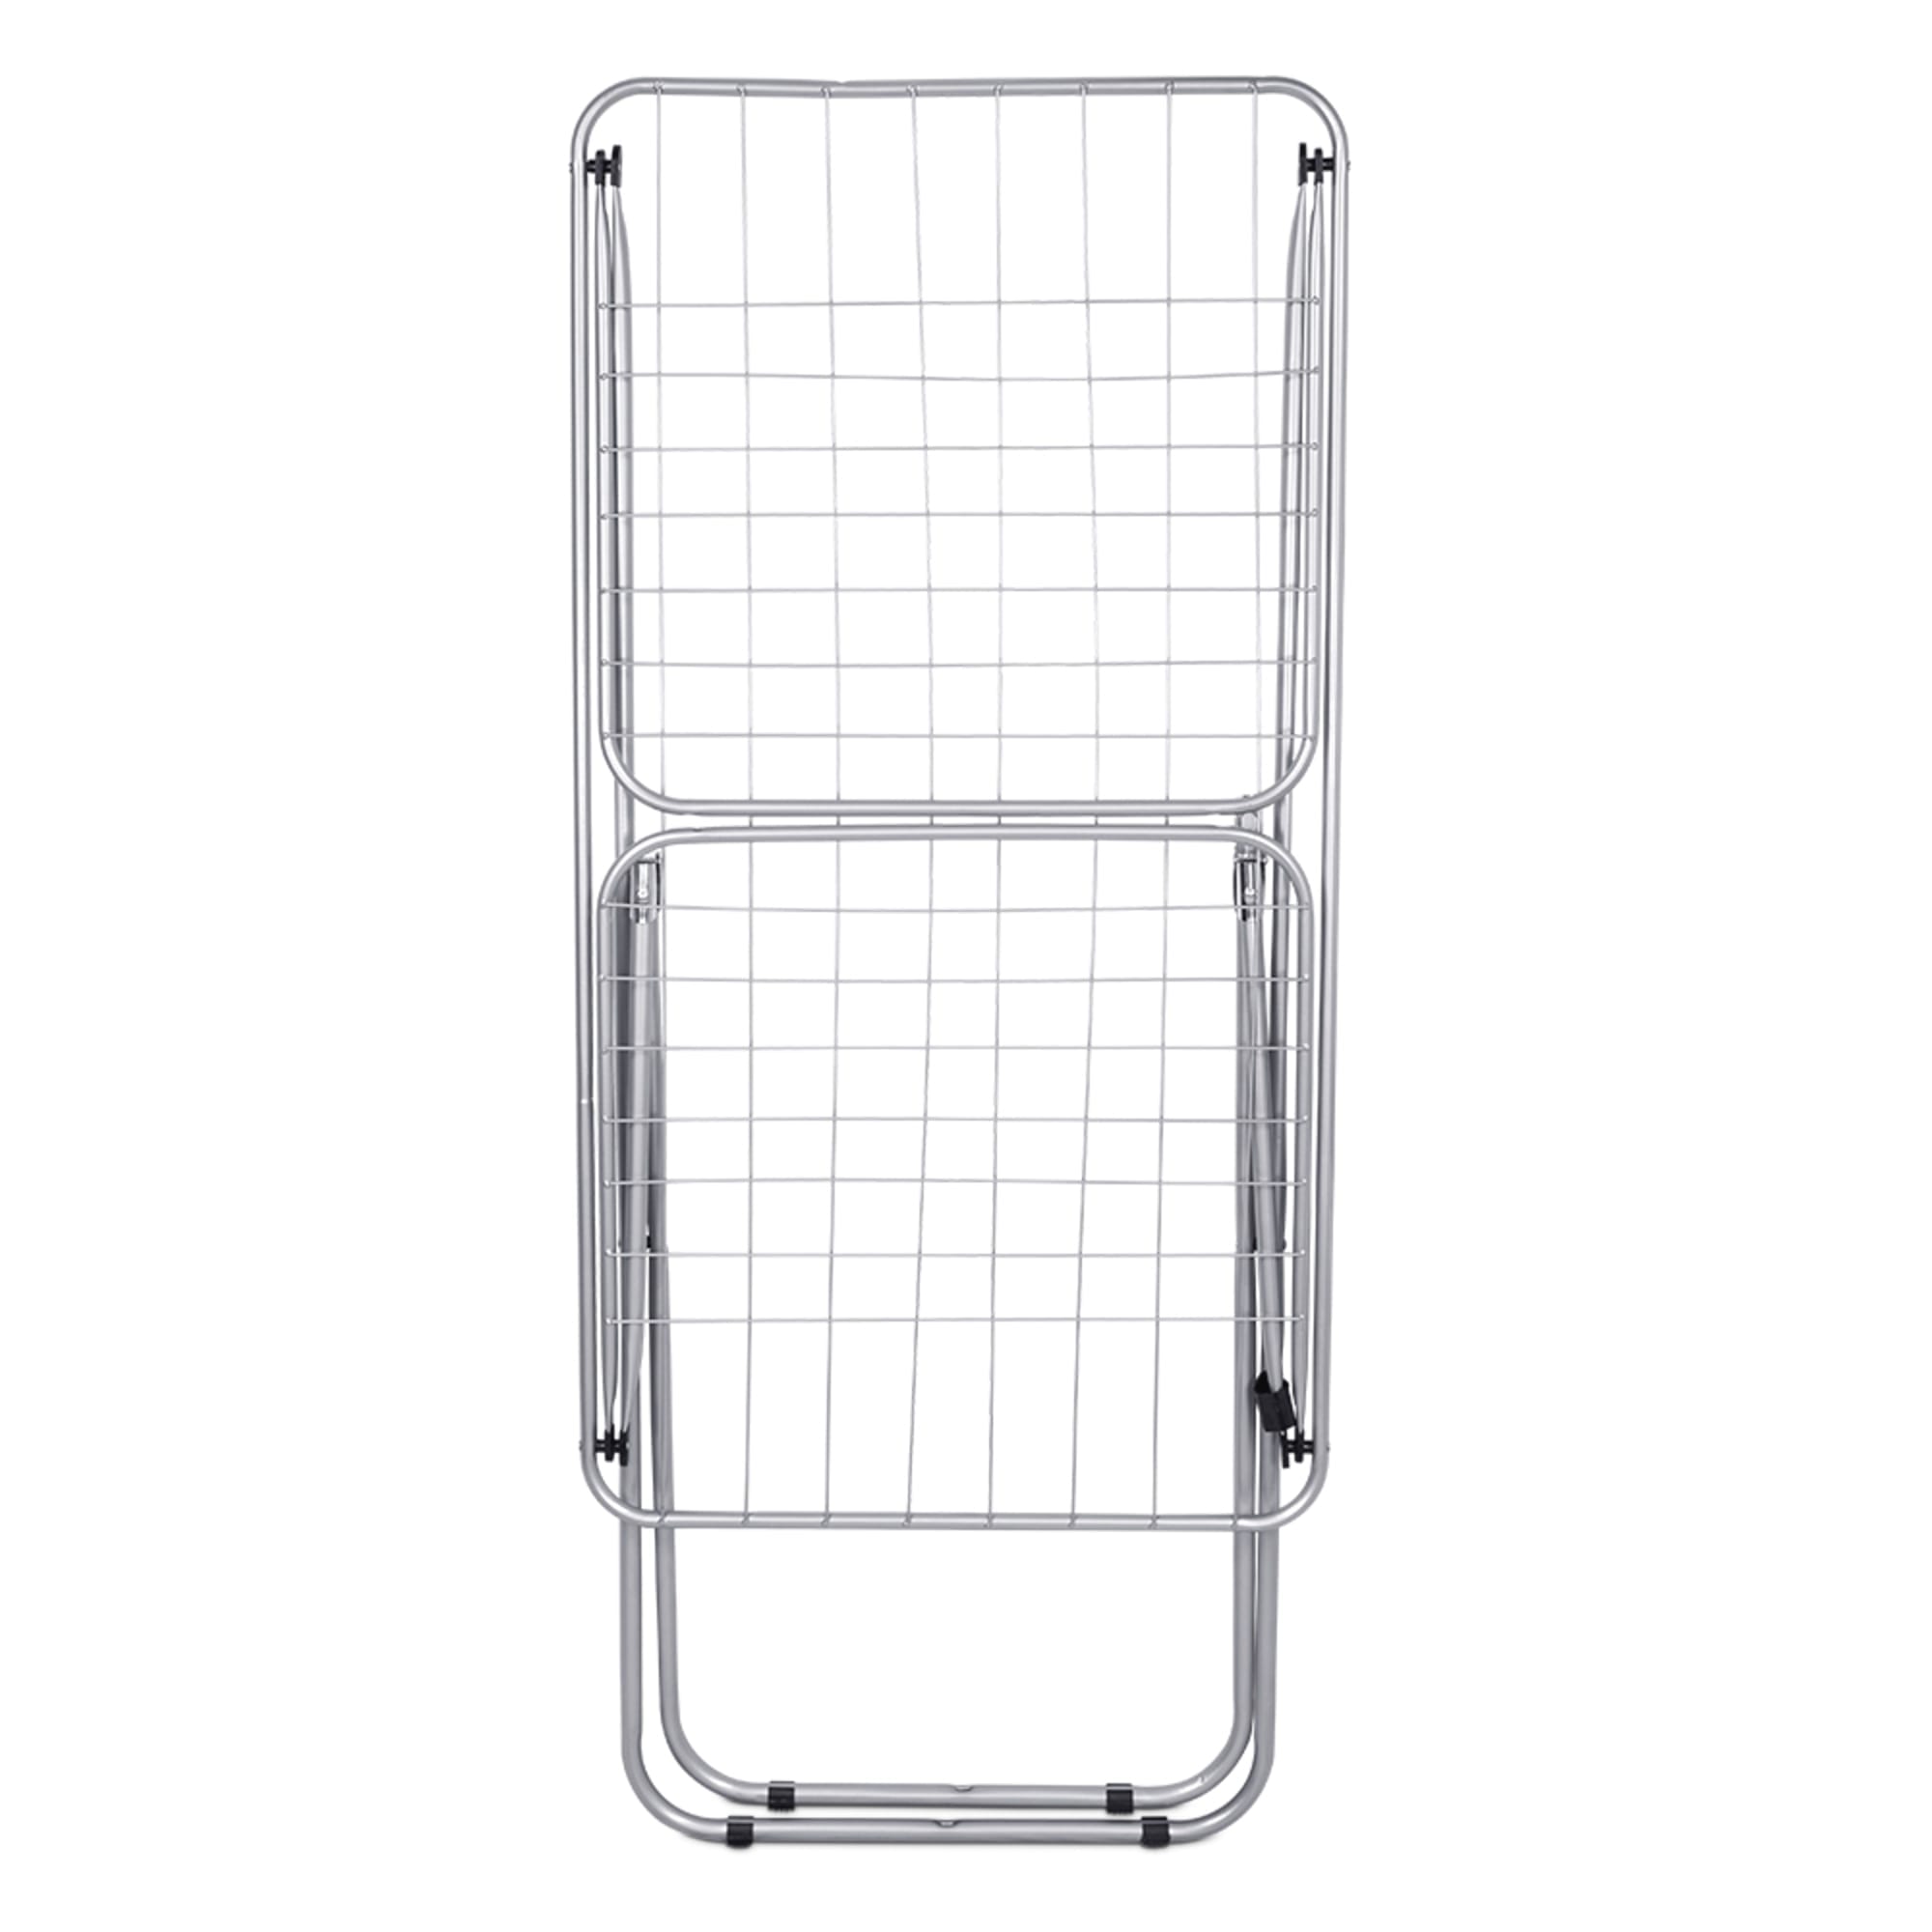 Home Basics Steel Clothes Drying Rack $12.00 EACH, CASE PACK OF 6